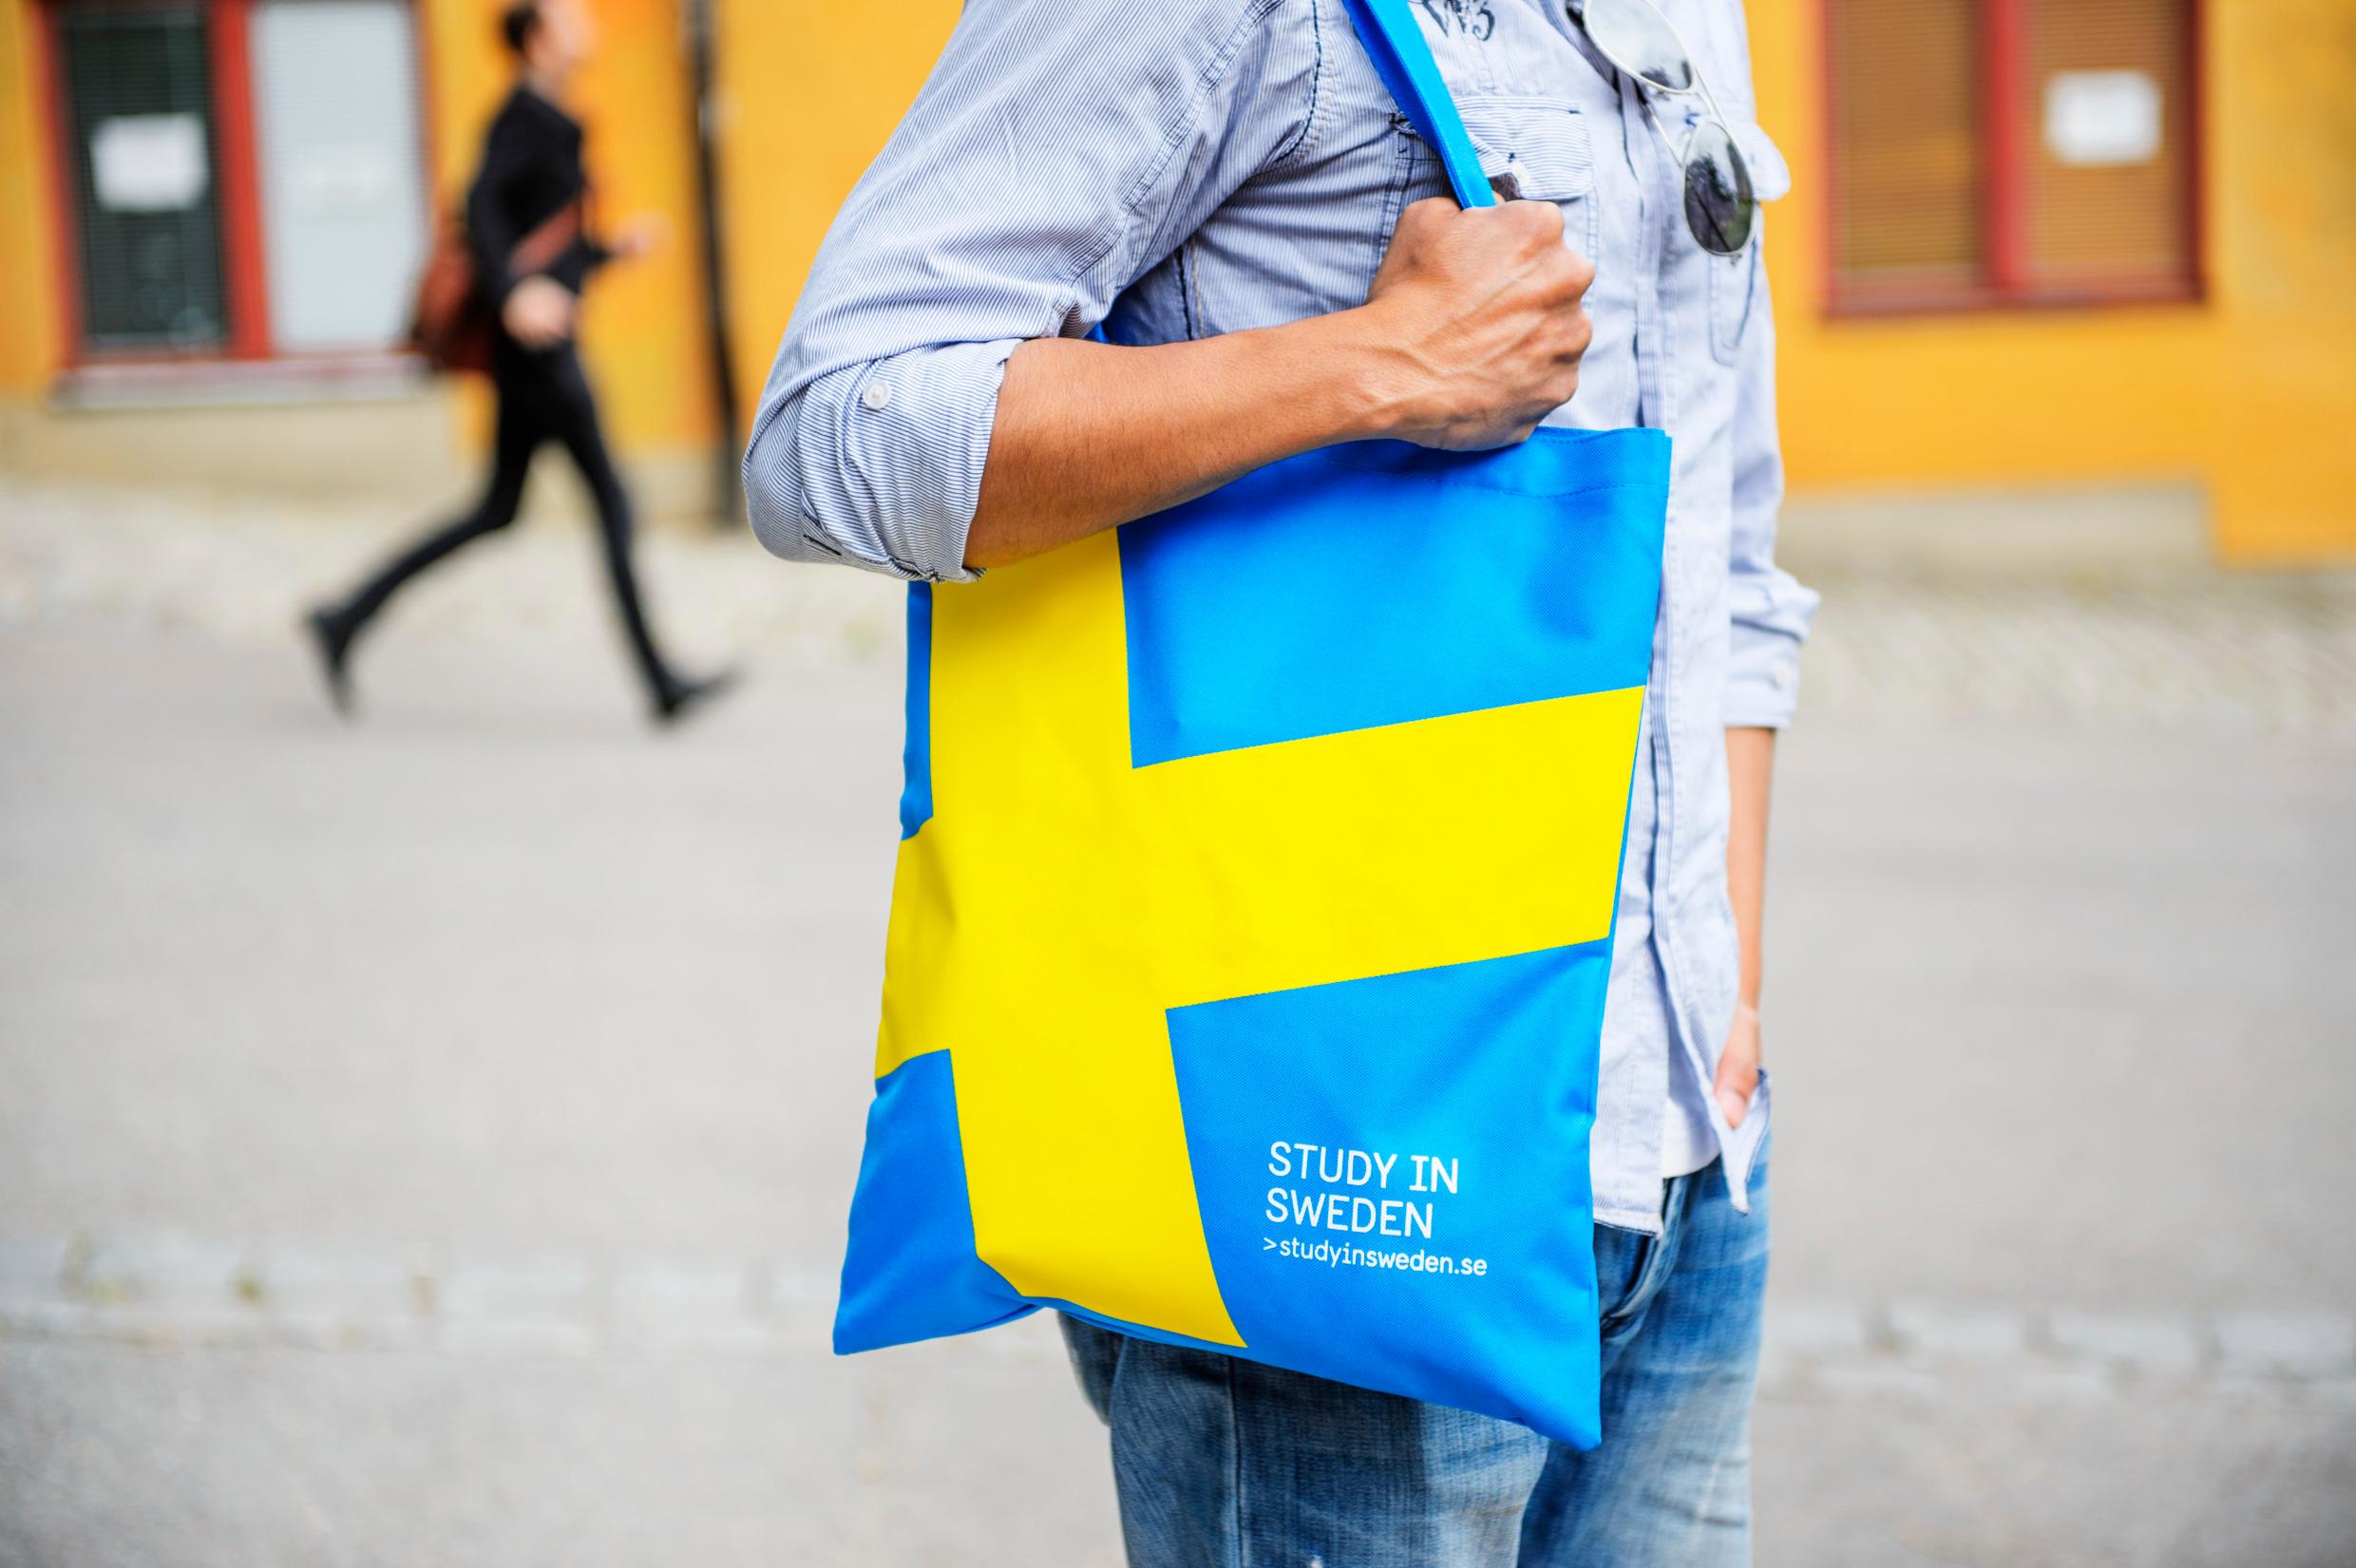 A person with a blue-and-yellow tote bag over one shoulder. Another person seen, blurred, in the background.